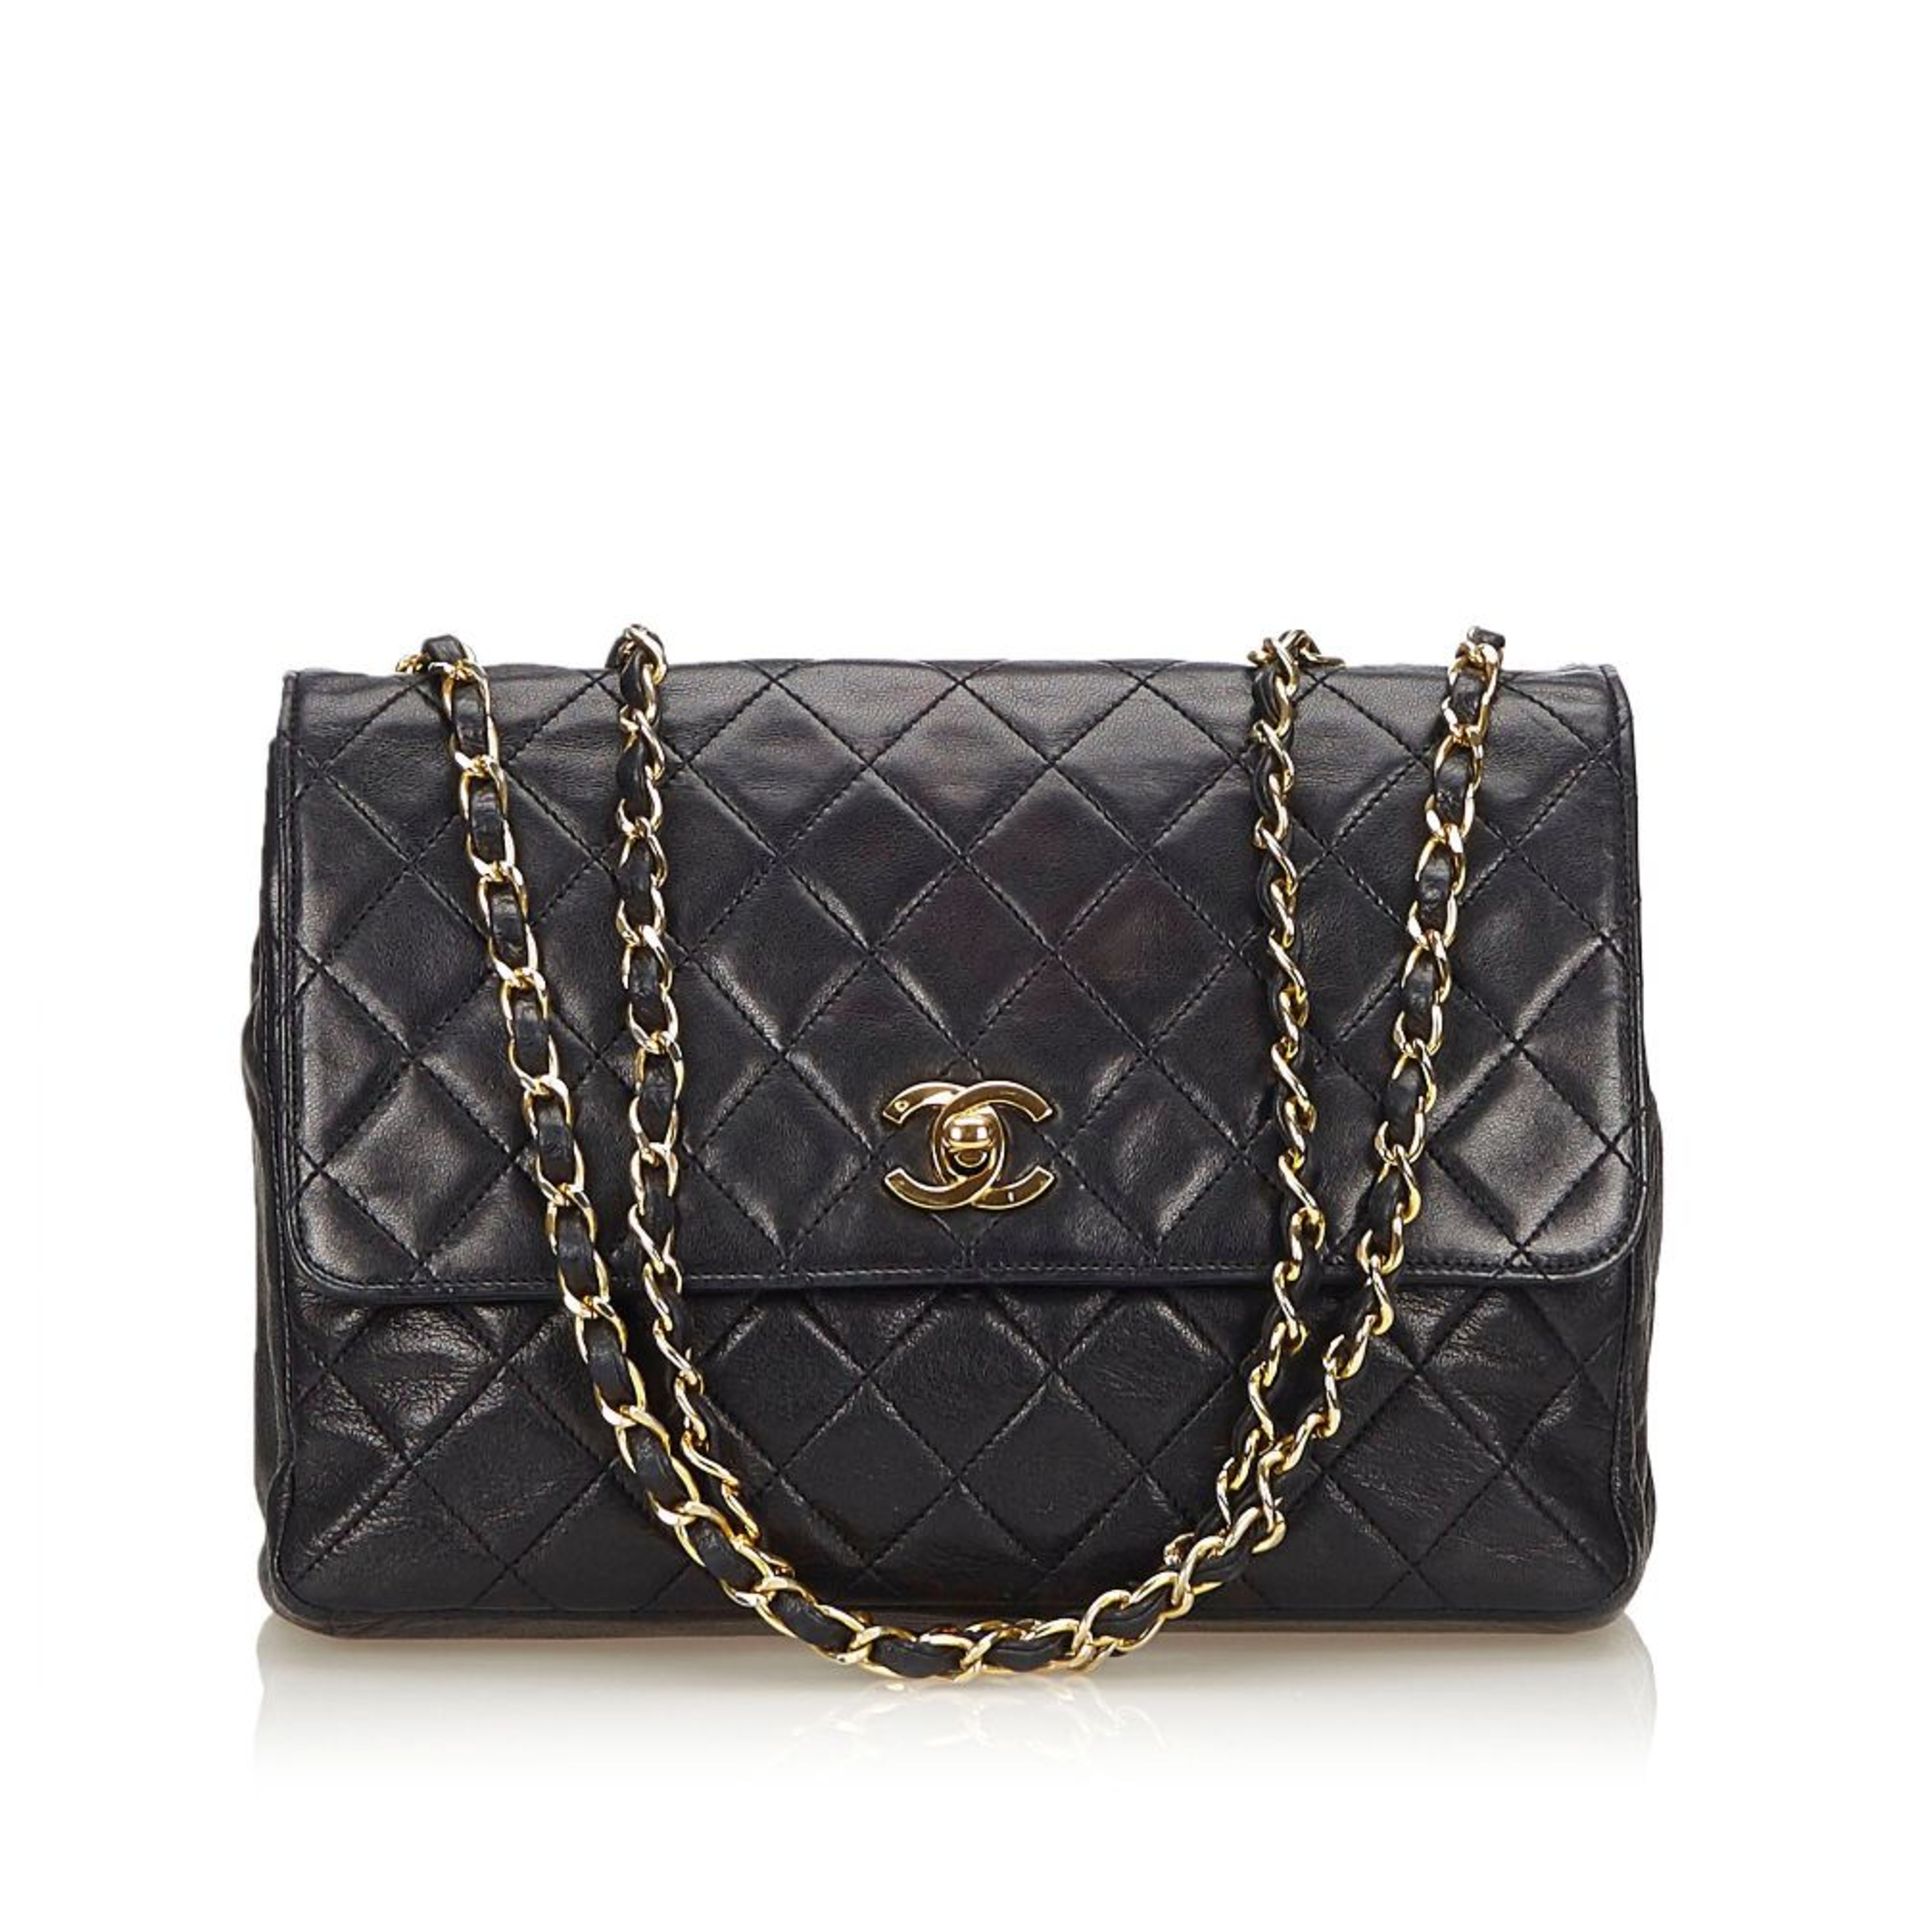 A Chanel matelassé leather flap bag,featuring a lambskin leather body, exterior back pocket, gold-